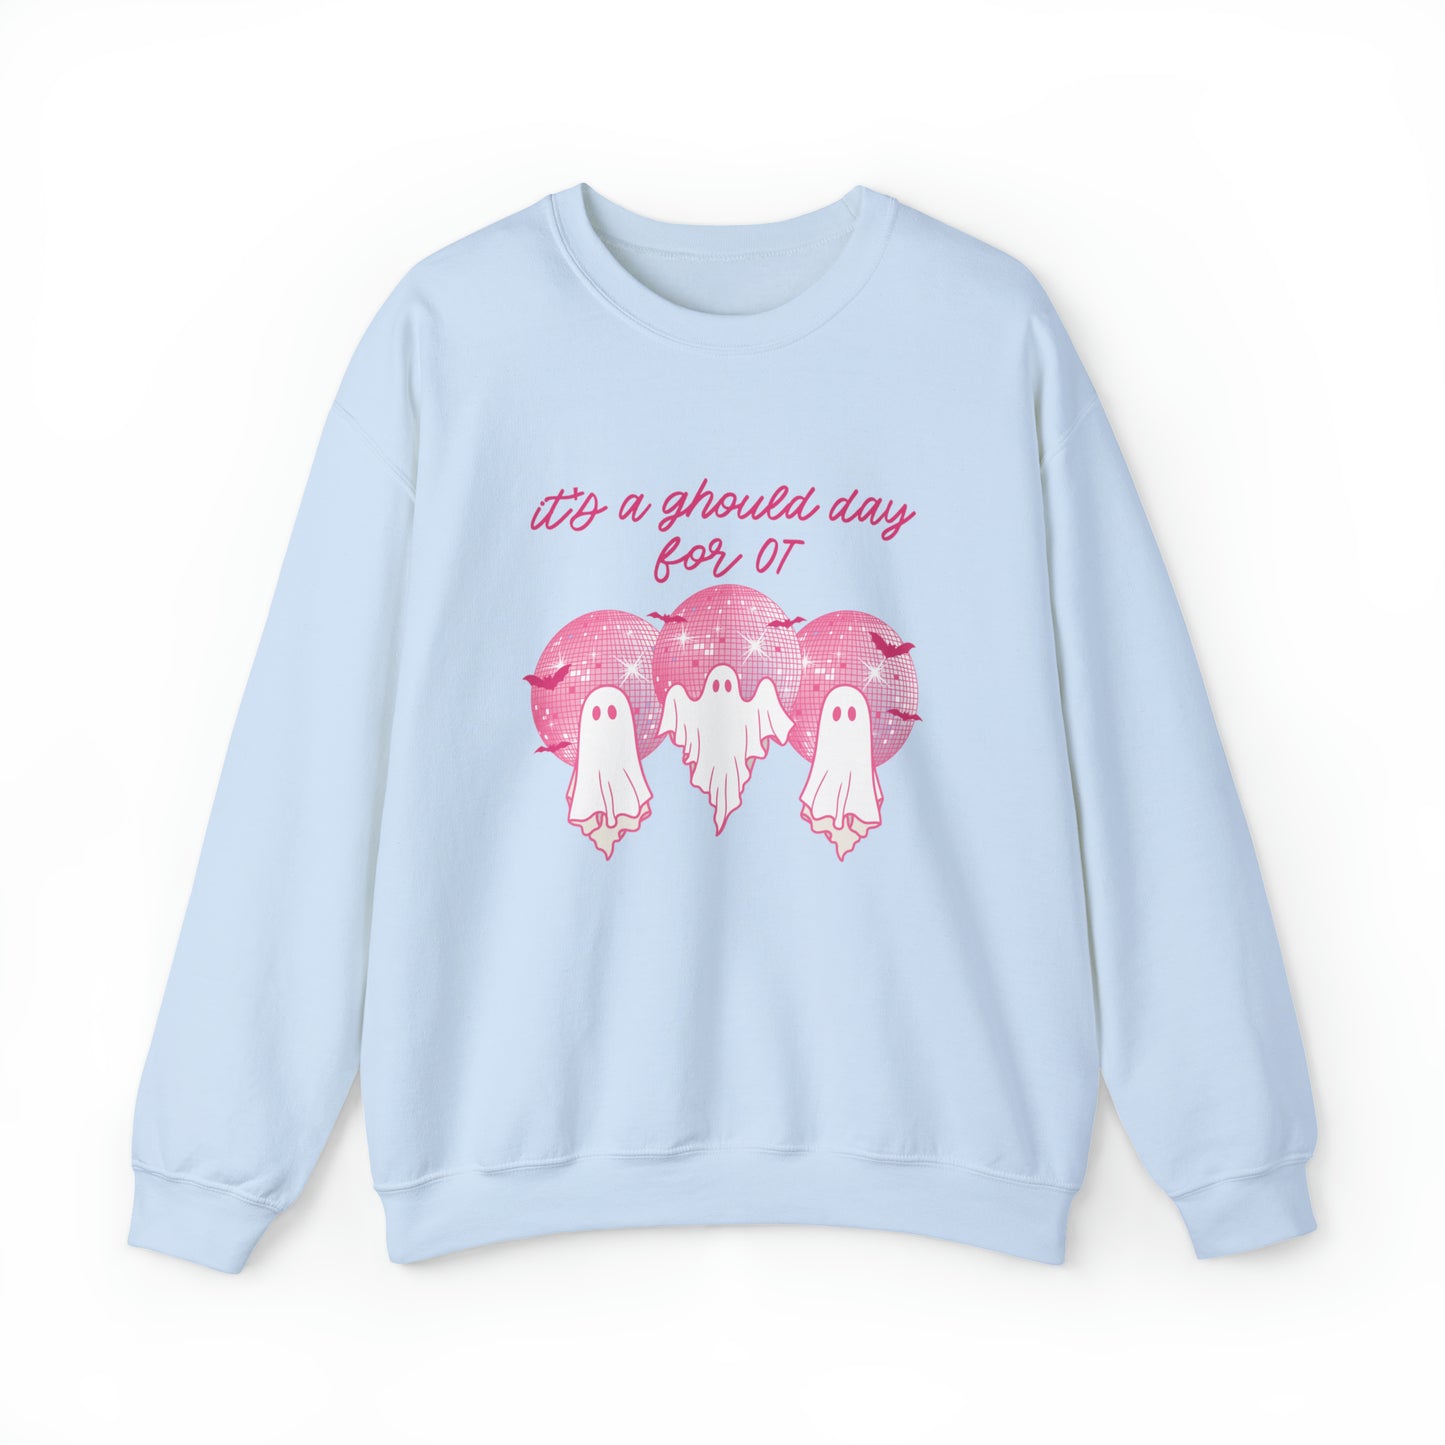 It's a Ghould Day for OT Crewneck Sweatshirt